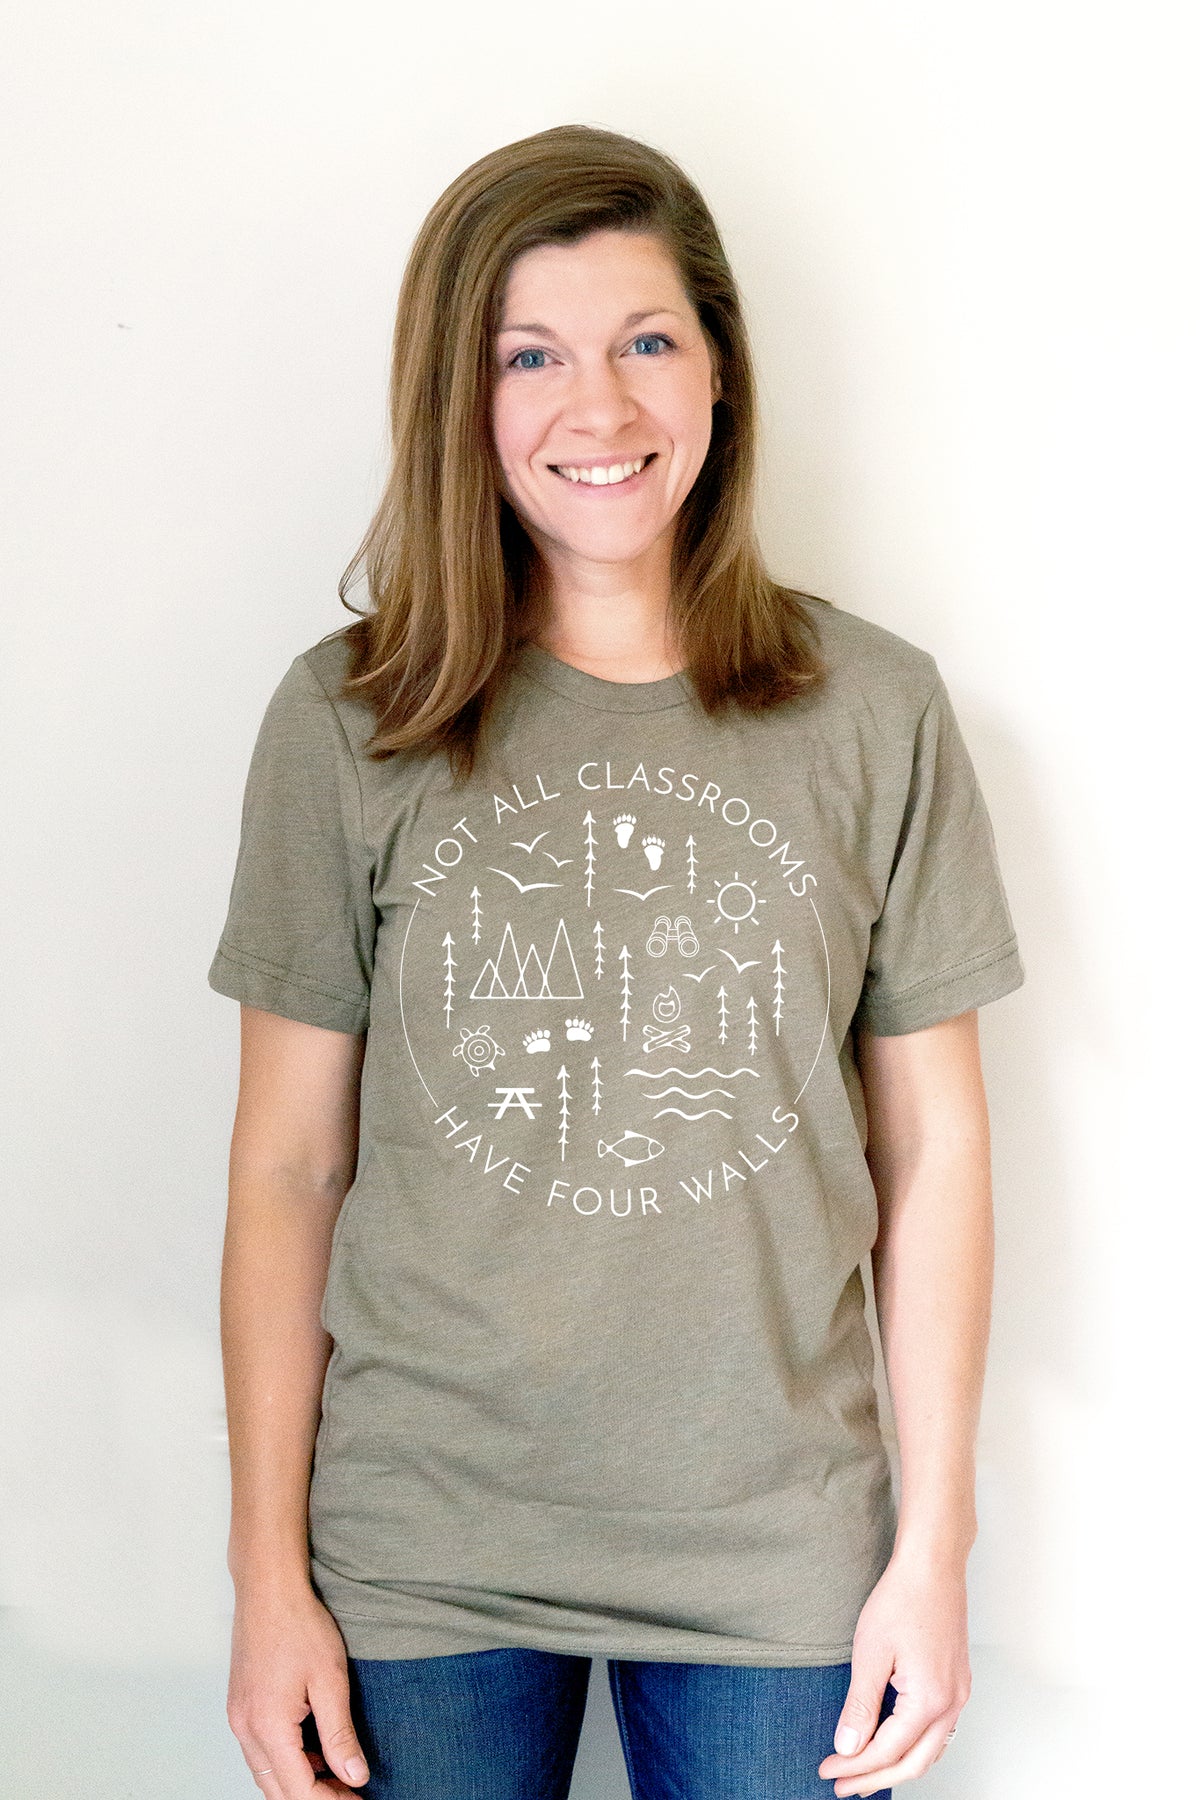 Not All Classrooms Have Four Walls Shirt